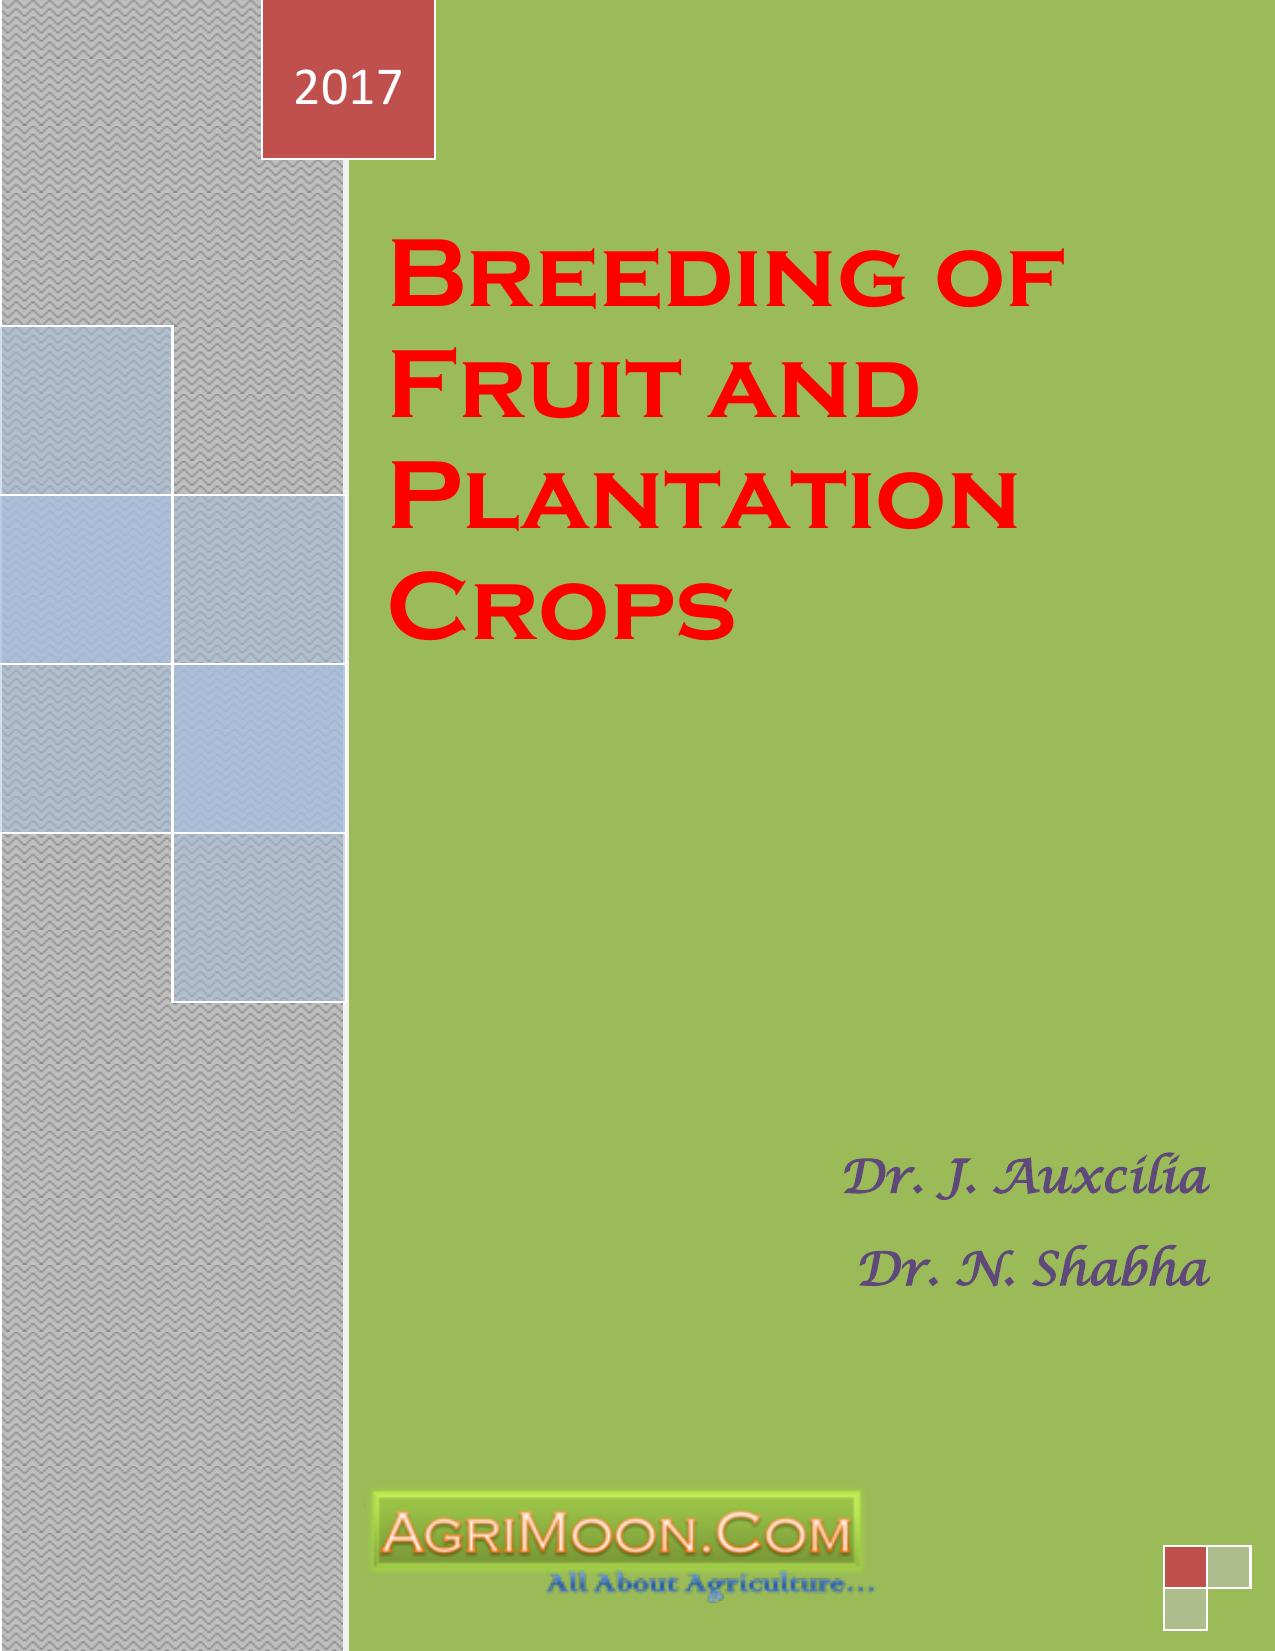 Breeding-of-Fruit-and-Plantation-Crops 2016